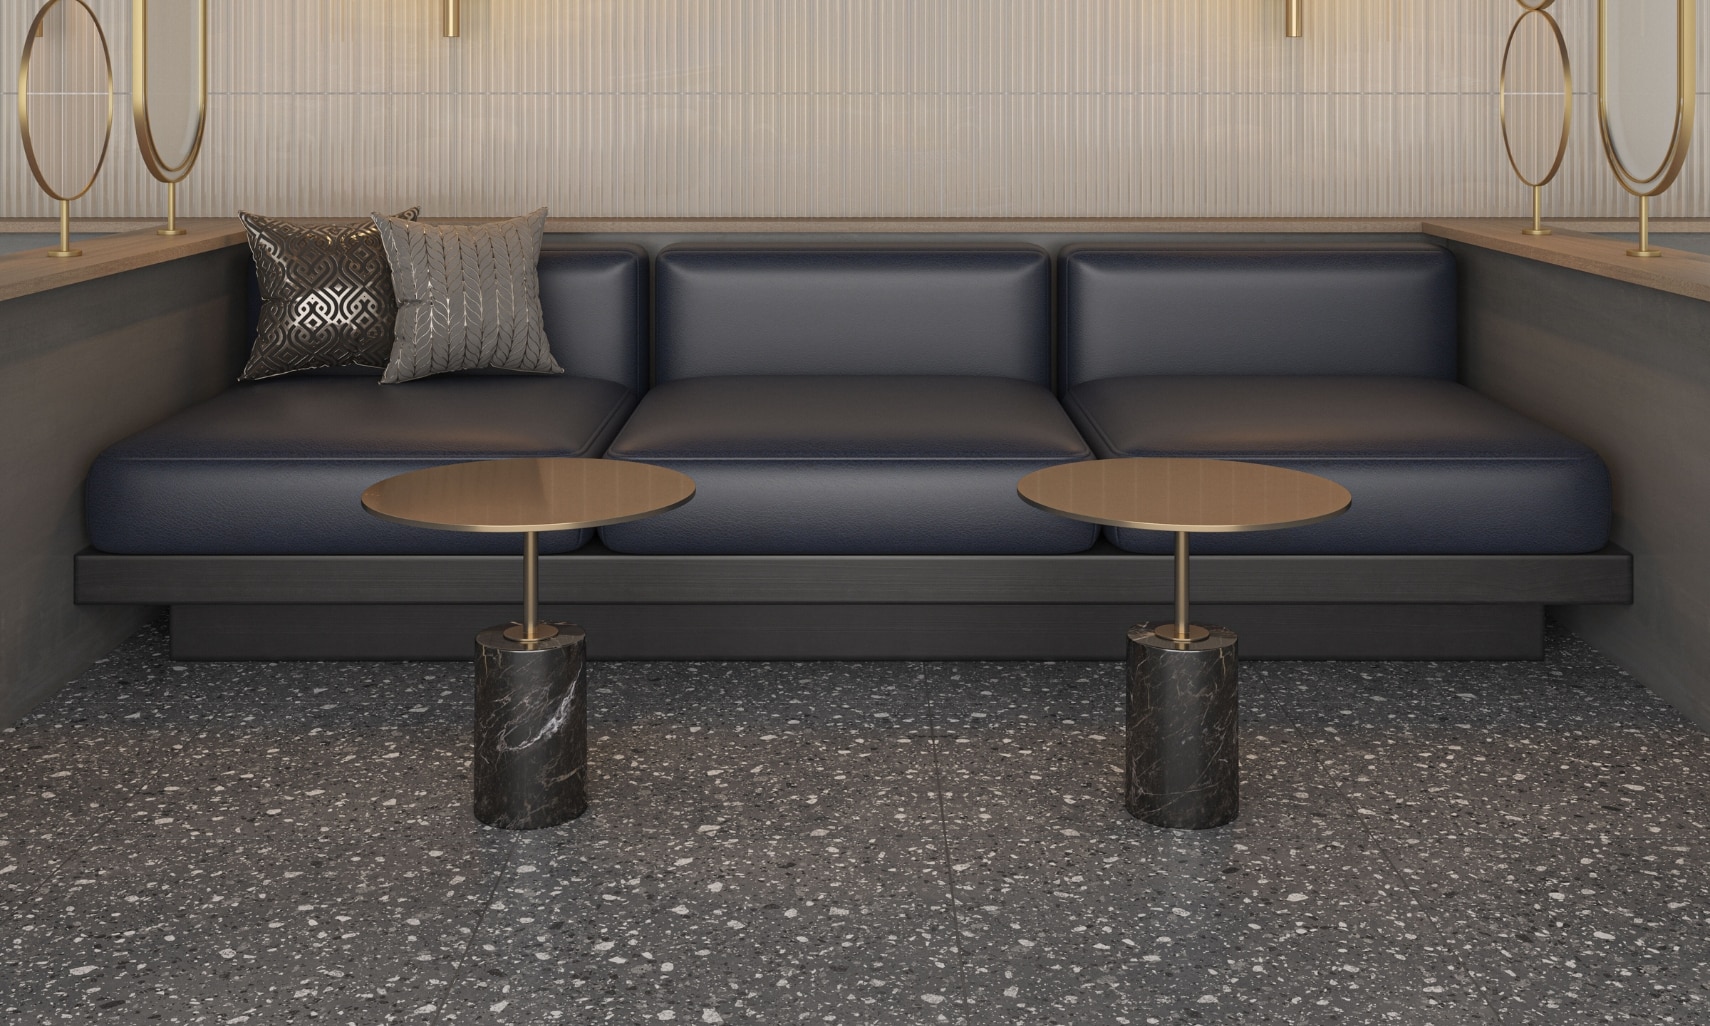 Lounge area with beige textured wall tile, black leather booth, two small metal and marble tables, and dark gray terrazzo look floor tile.